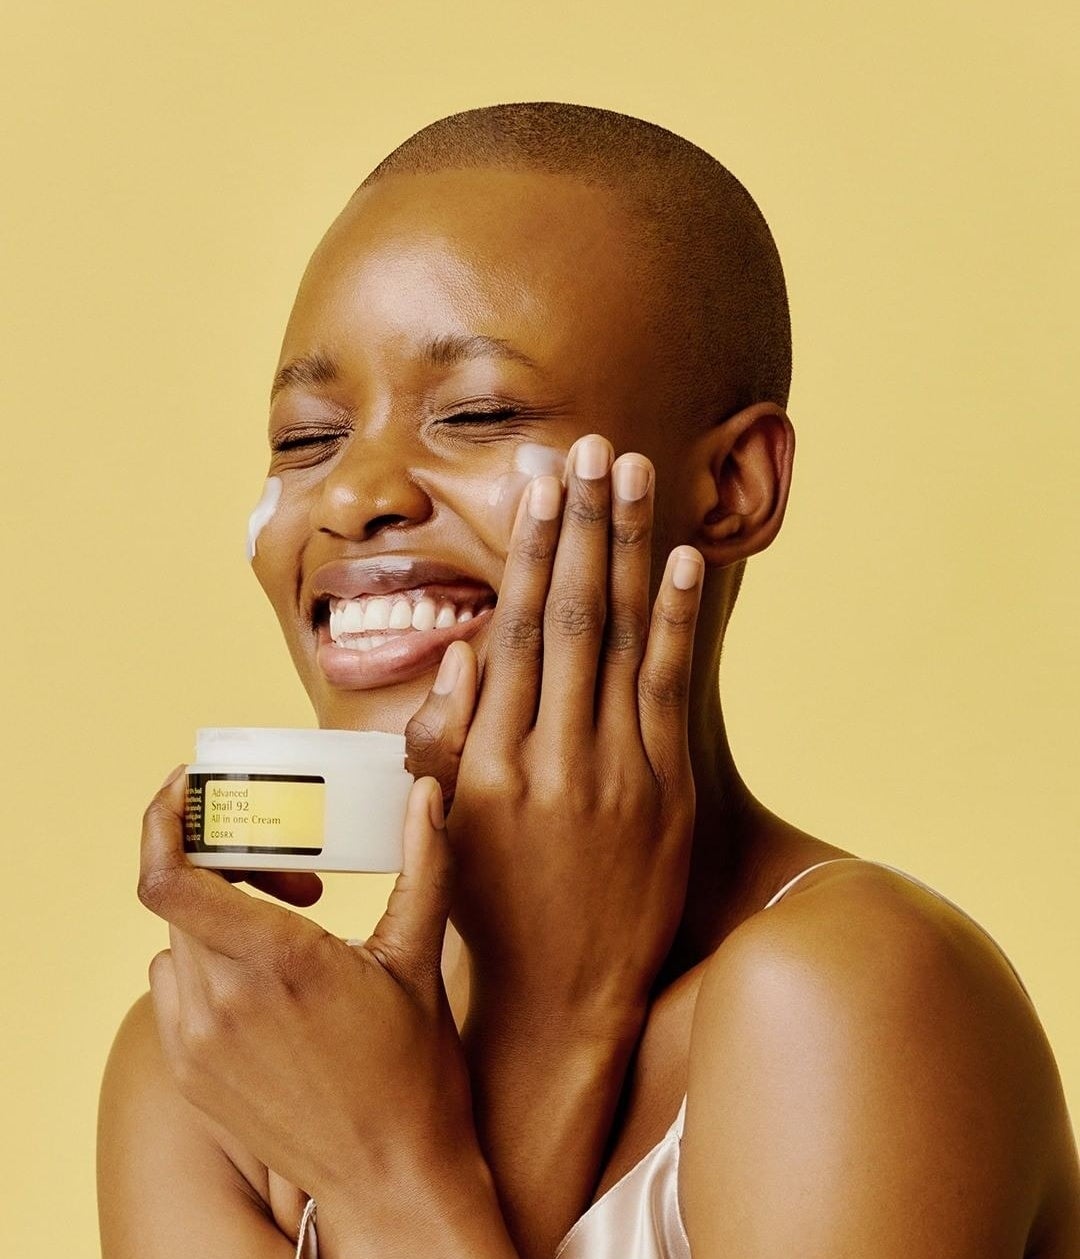 a smiling person applying cream to their face